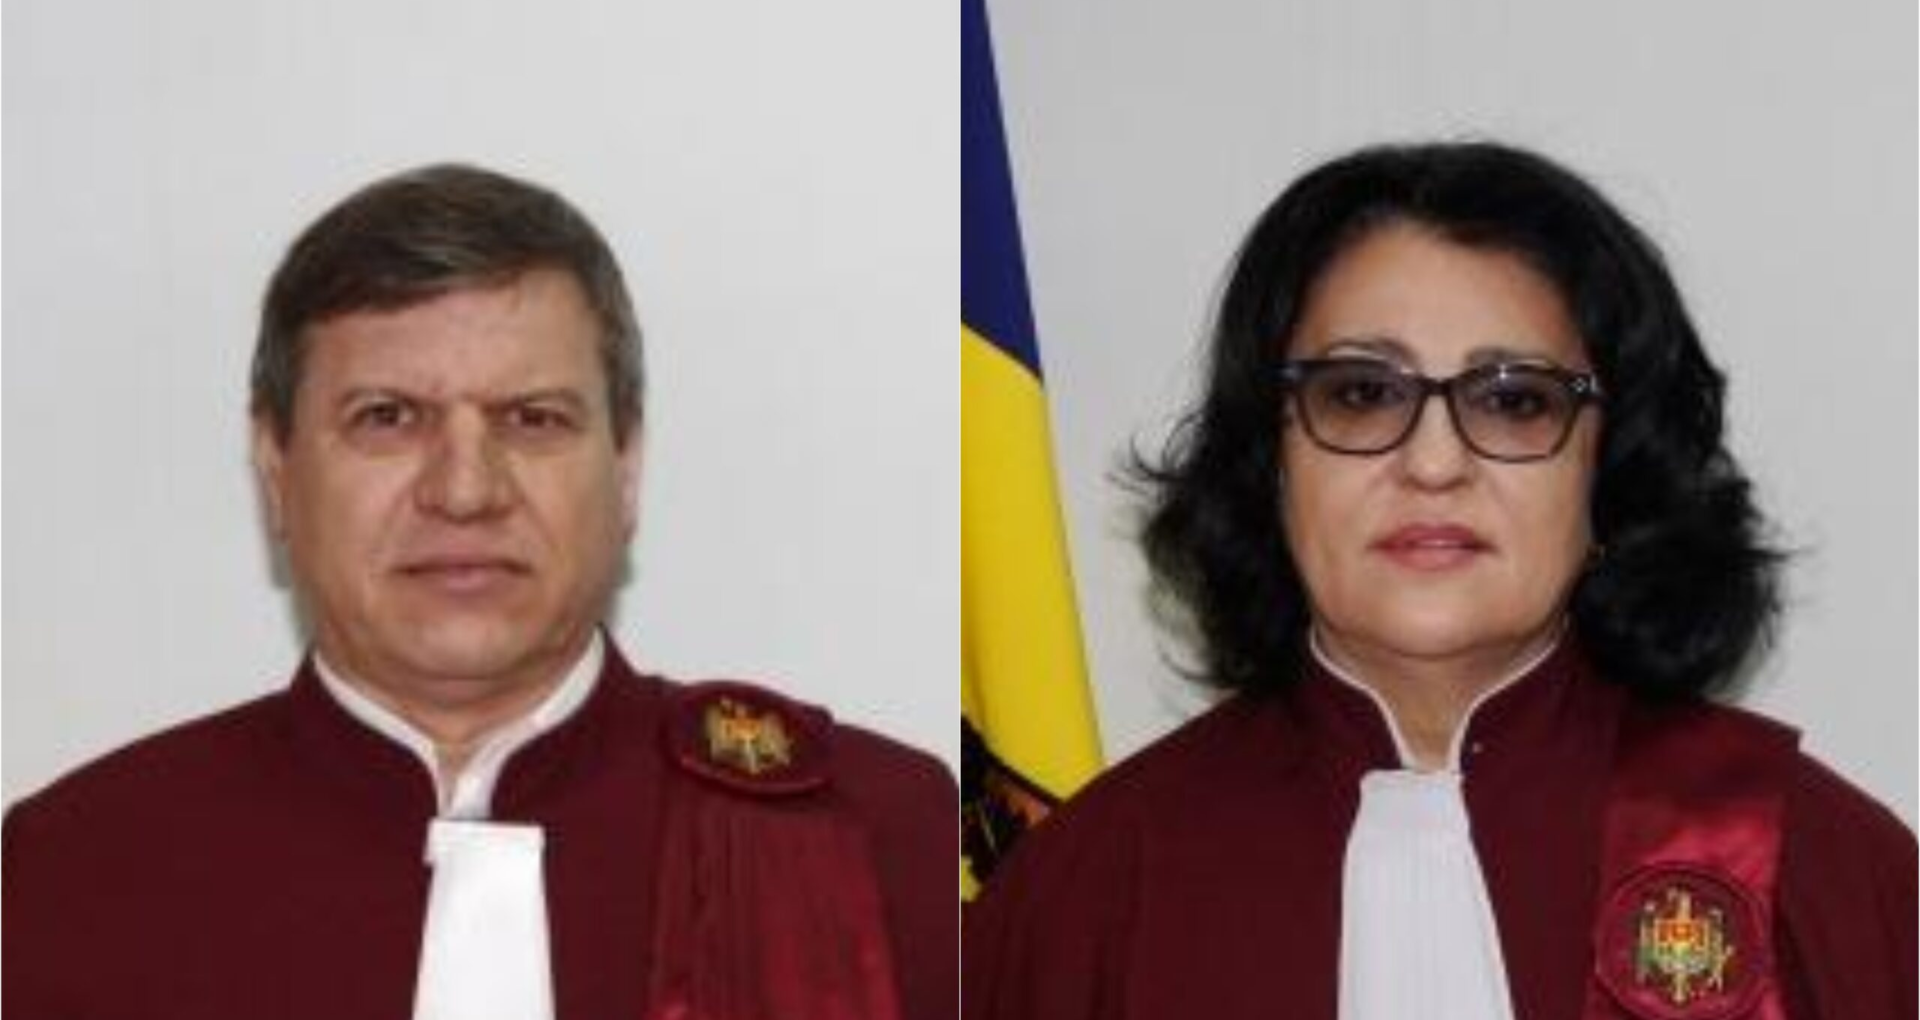 Chișinău Court ordered the seizure of the National Hotel in the Metalferos case, in which former MP Vladimir Andronachi is investigated